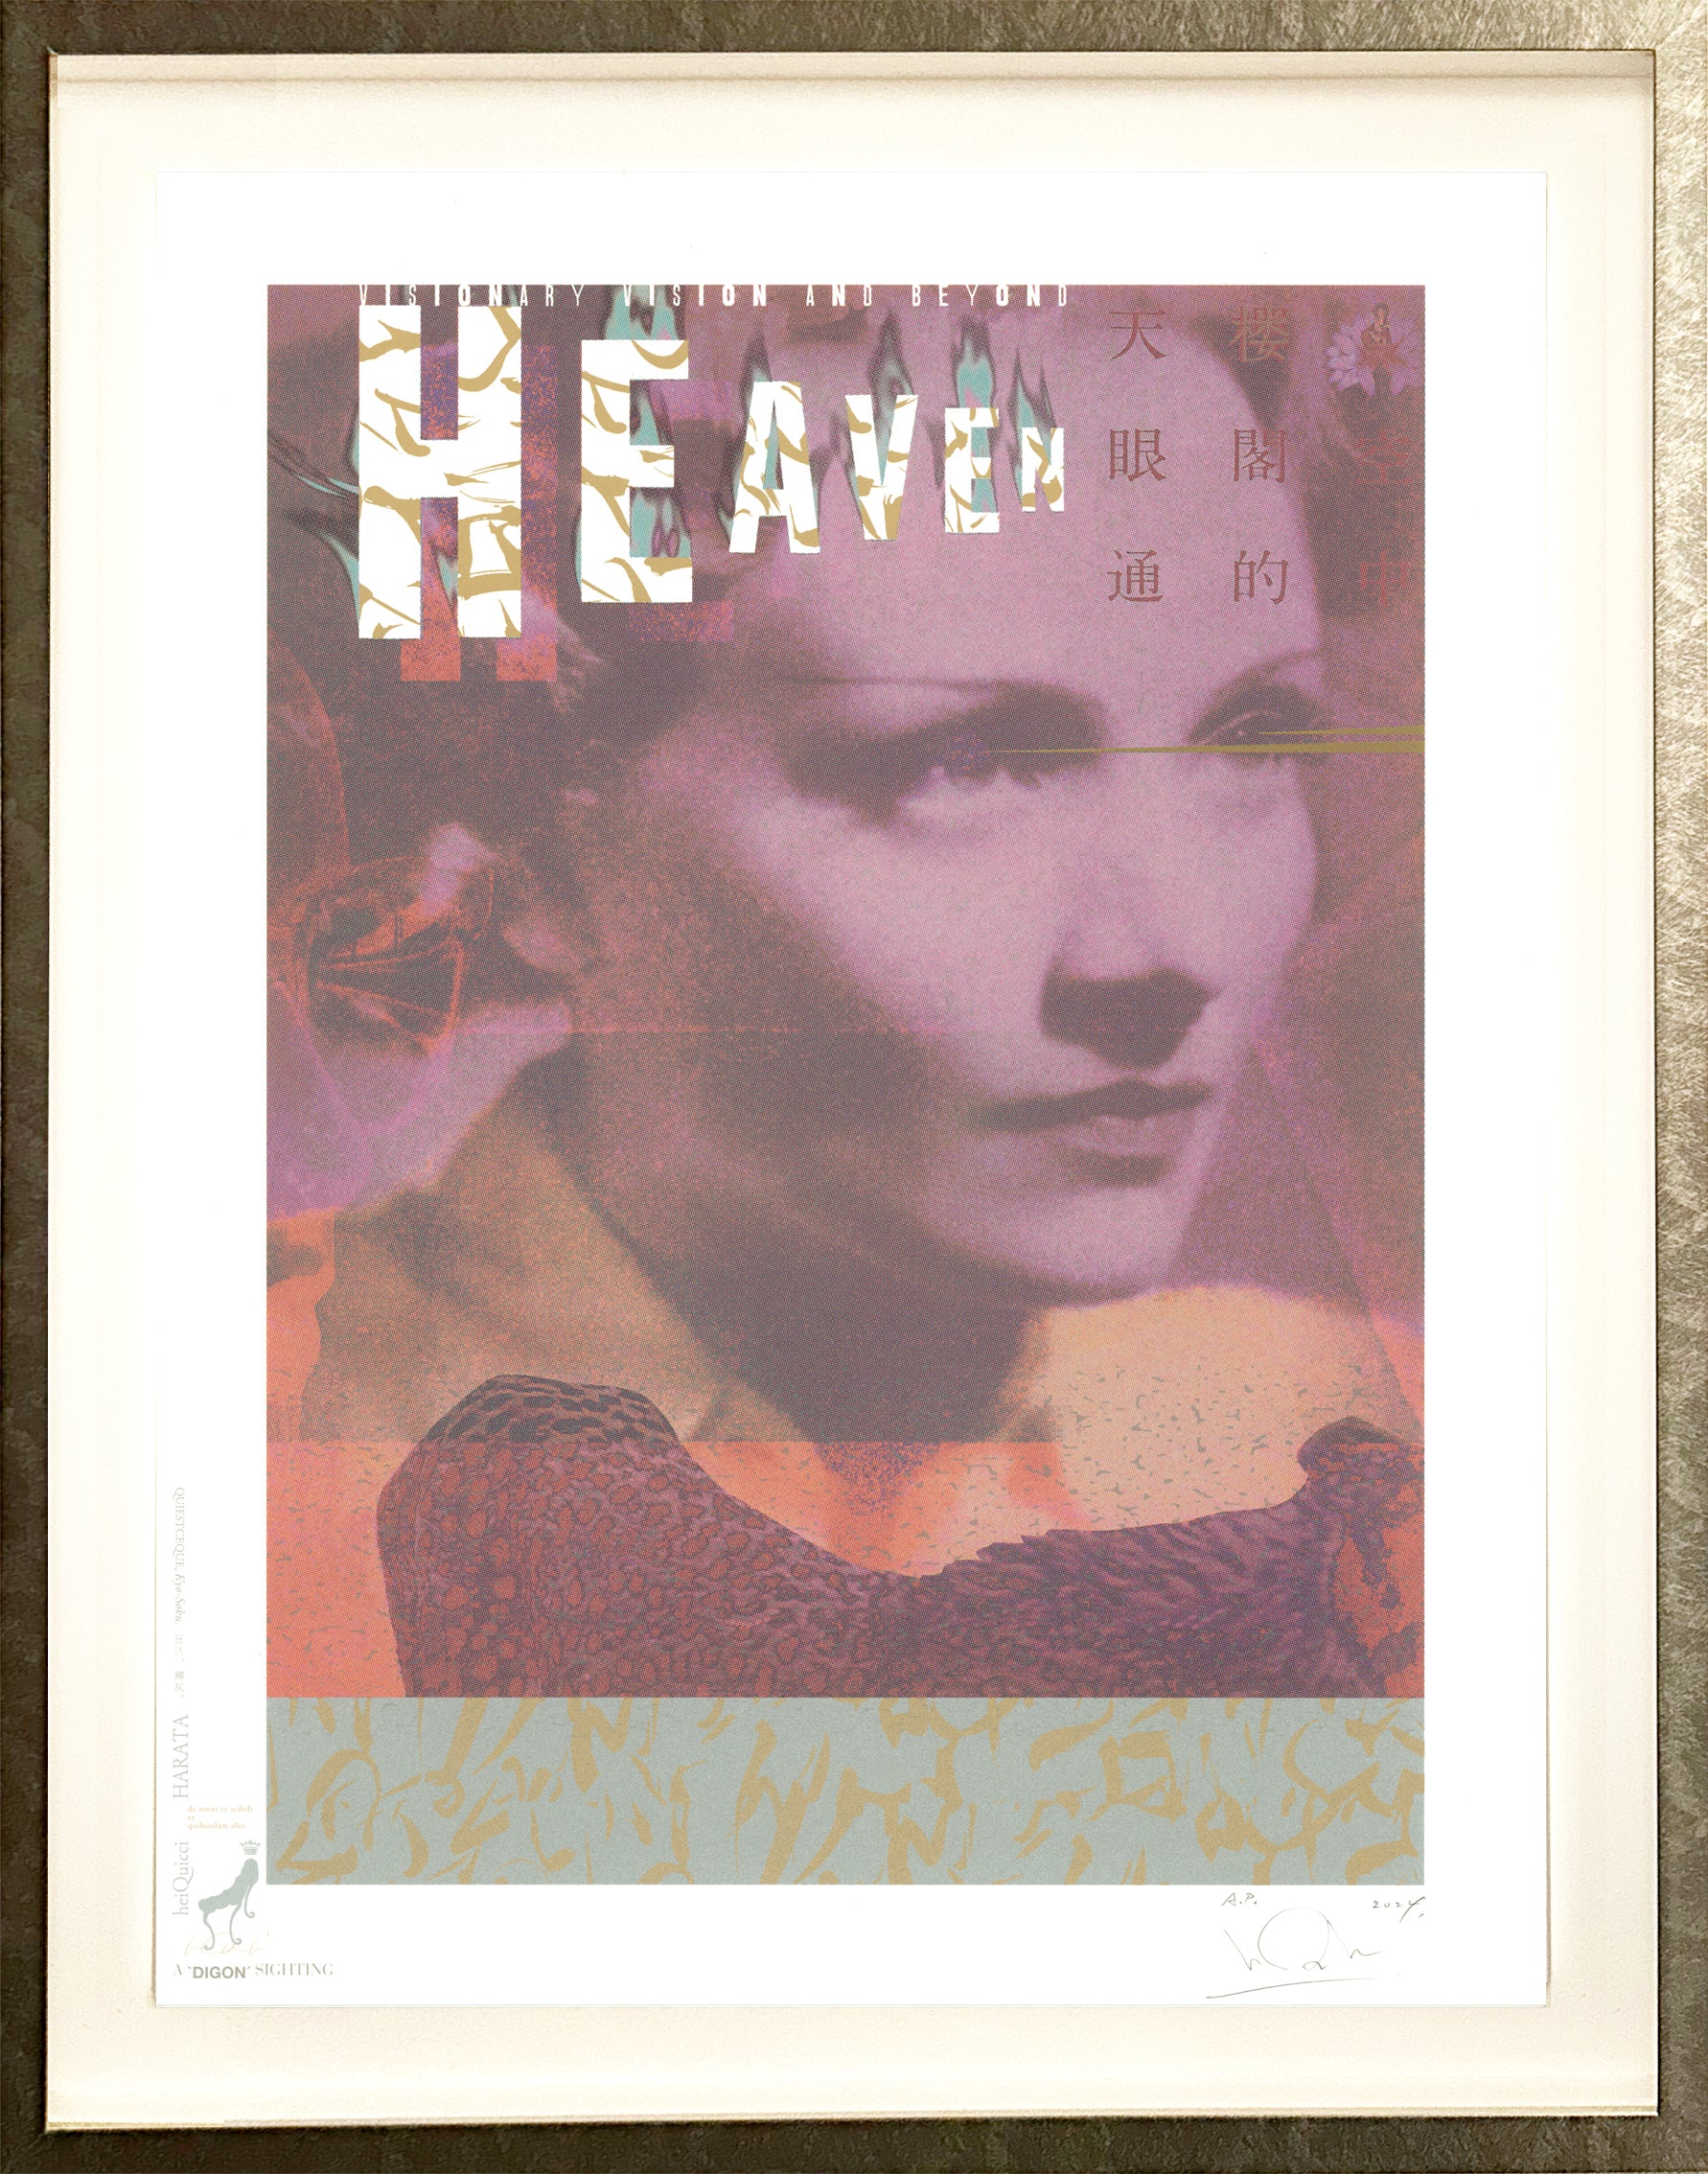 Hommage to “HEAVEN”, the magazine of Visionary Vision and Beyond.